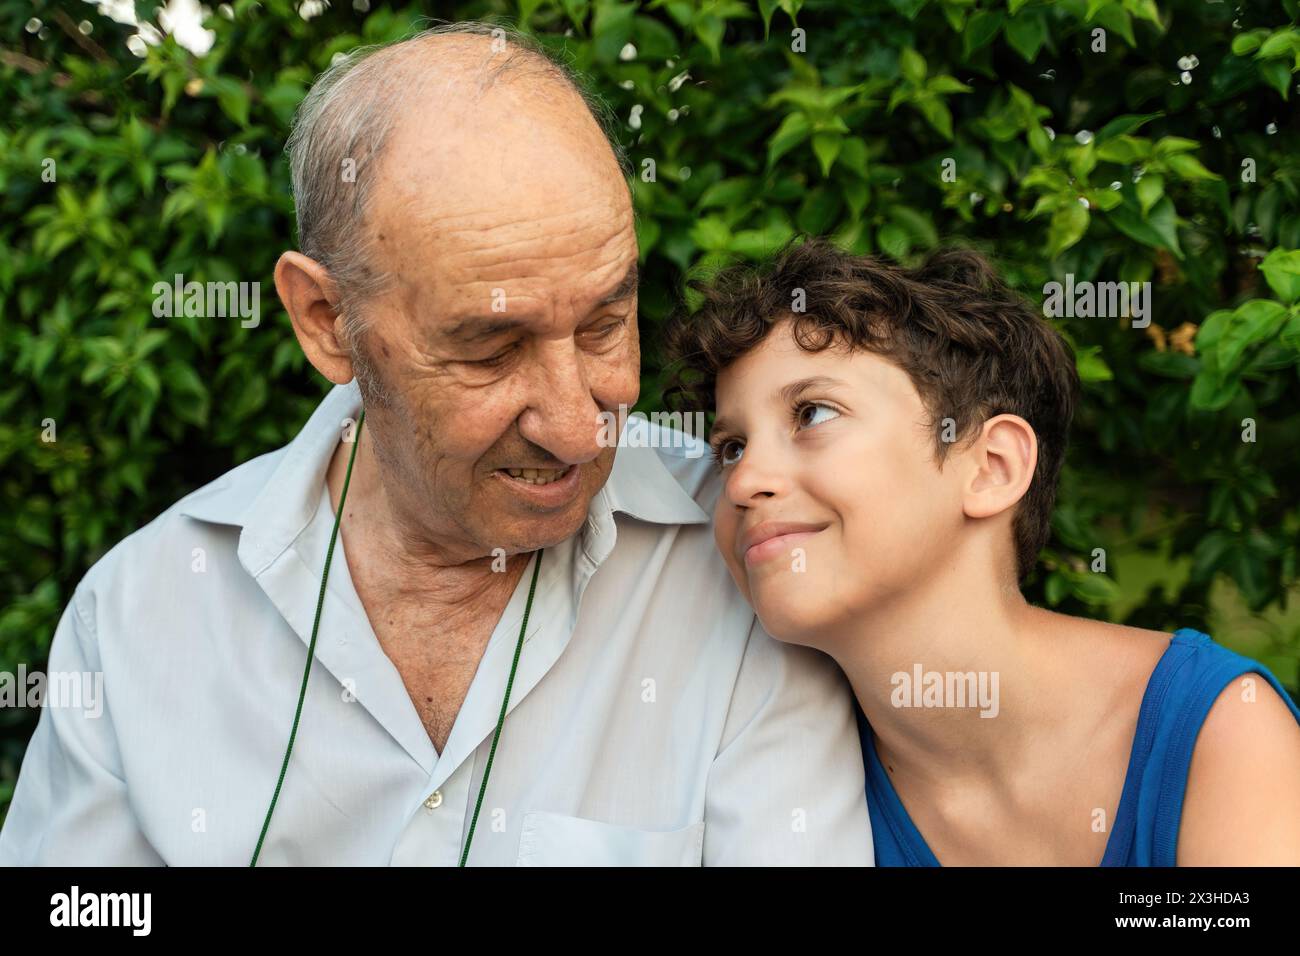 Grandfather and grandson enjoying a shared laugh in a serene garden - Elderly man and a young boy gazing in a tender moment, surrounded by lush greene Stock Photo